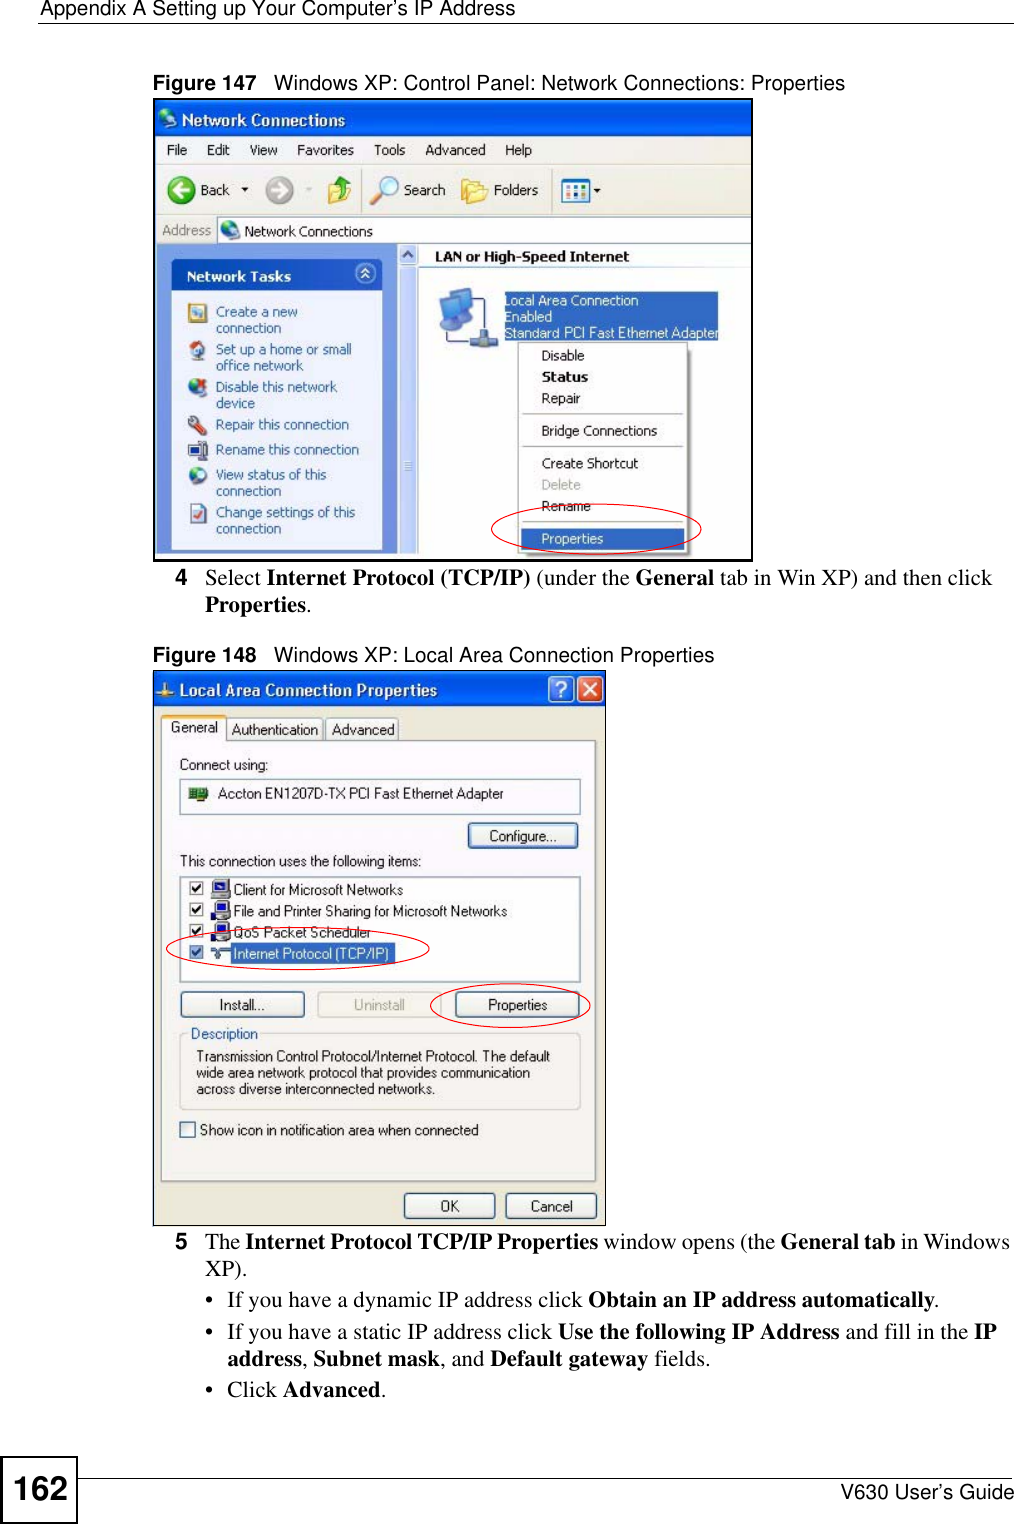 Appendix A Setting up Your Computer’s IP AddressV630 User’s Guide162Figure 147   Windows XP: Control Panel: Network Connections: Properties4Select Internet Protocol (TCP/IP) (under the General tab in Win XP) and then click Properties.Figure 148   Windows XP: Local Area Connection Properties5The Internet Protocol TCP/IP Properties window opens (the General tab in Windows XP).• If you have a dynamic IP address click Obtain an IP address automatically.• If you have a static IP address click Use the following IP Address and fill in the IP address, Subnet mask, and Default gateway fields. • Click Advanced.